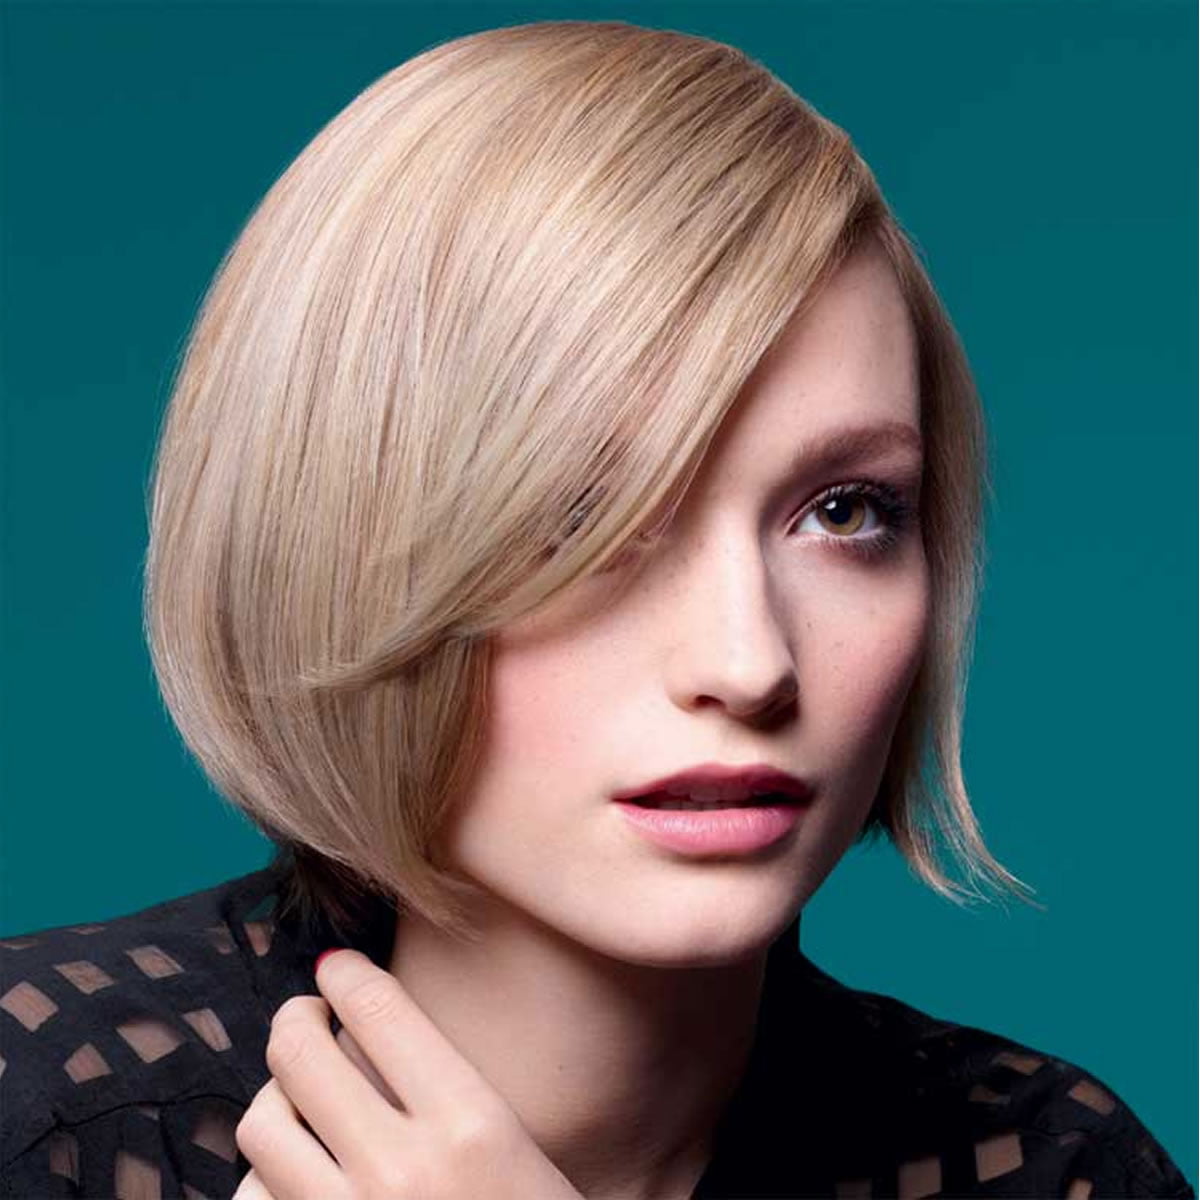 The Best 33 Short Bob Haircuts – 2019 Short Hairstyles for ...